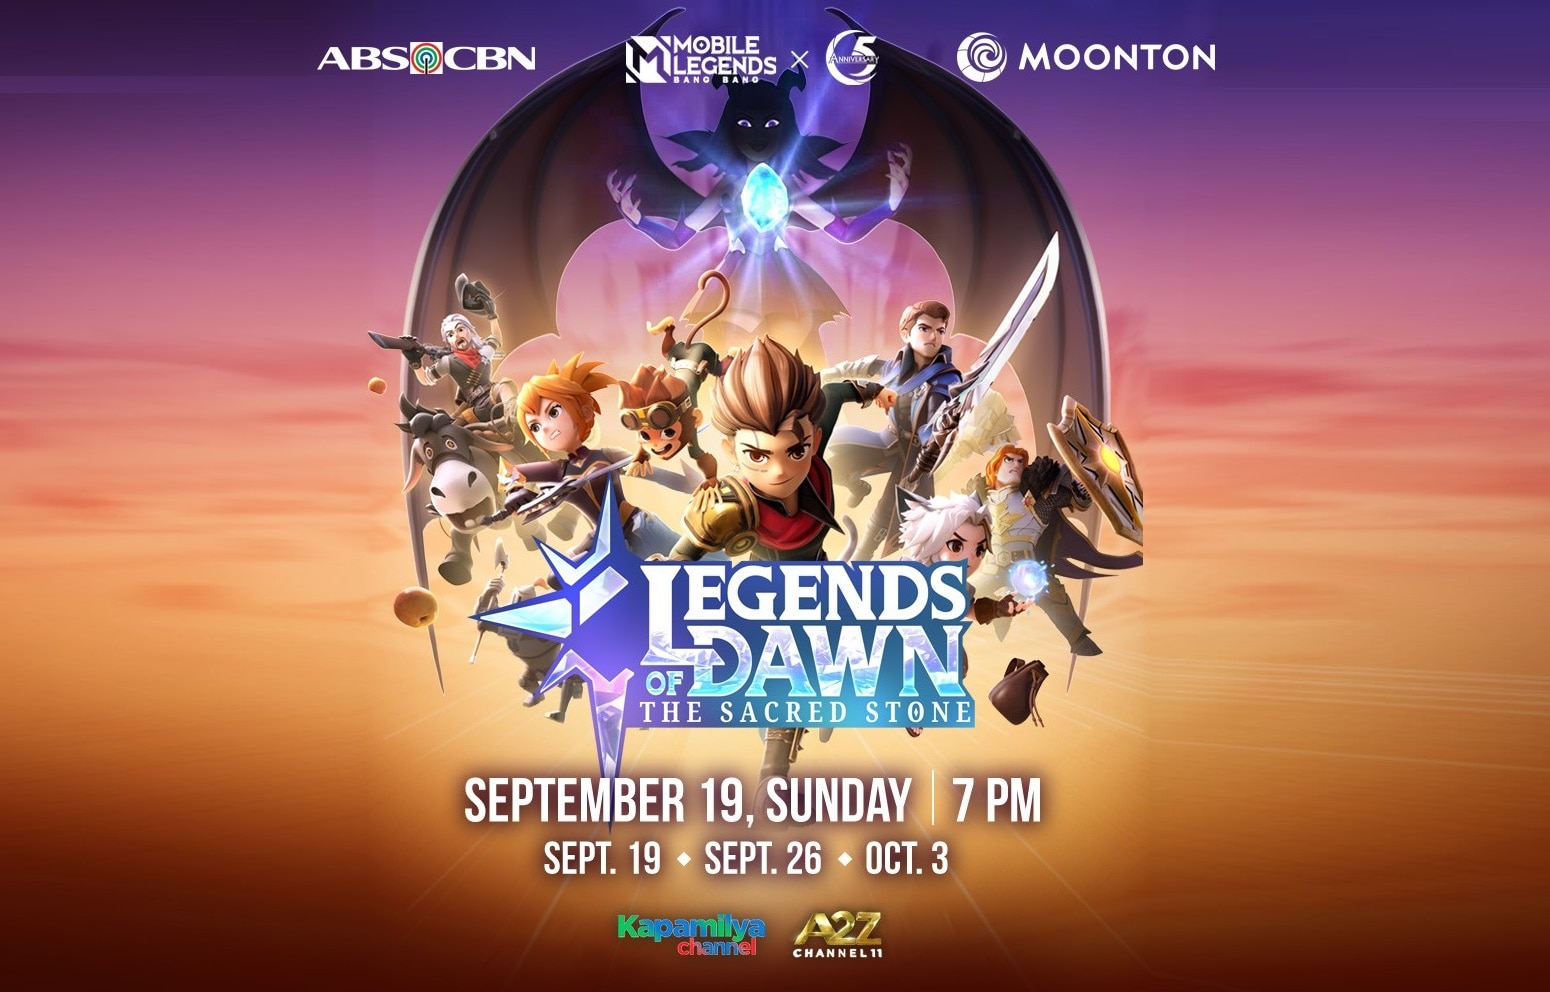 Mobile Legends' "Legends of Dawn: The Sacred Stone" airs on Kapamilya Channel, A2Z on September 19